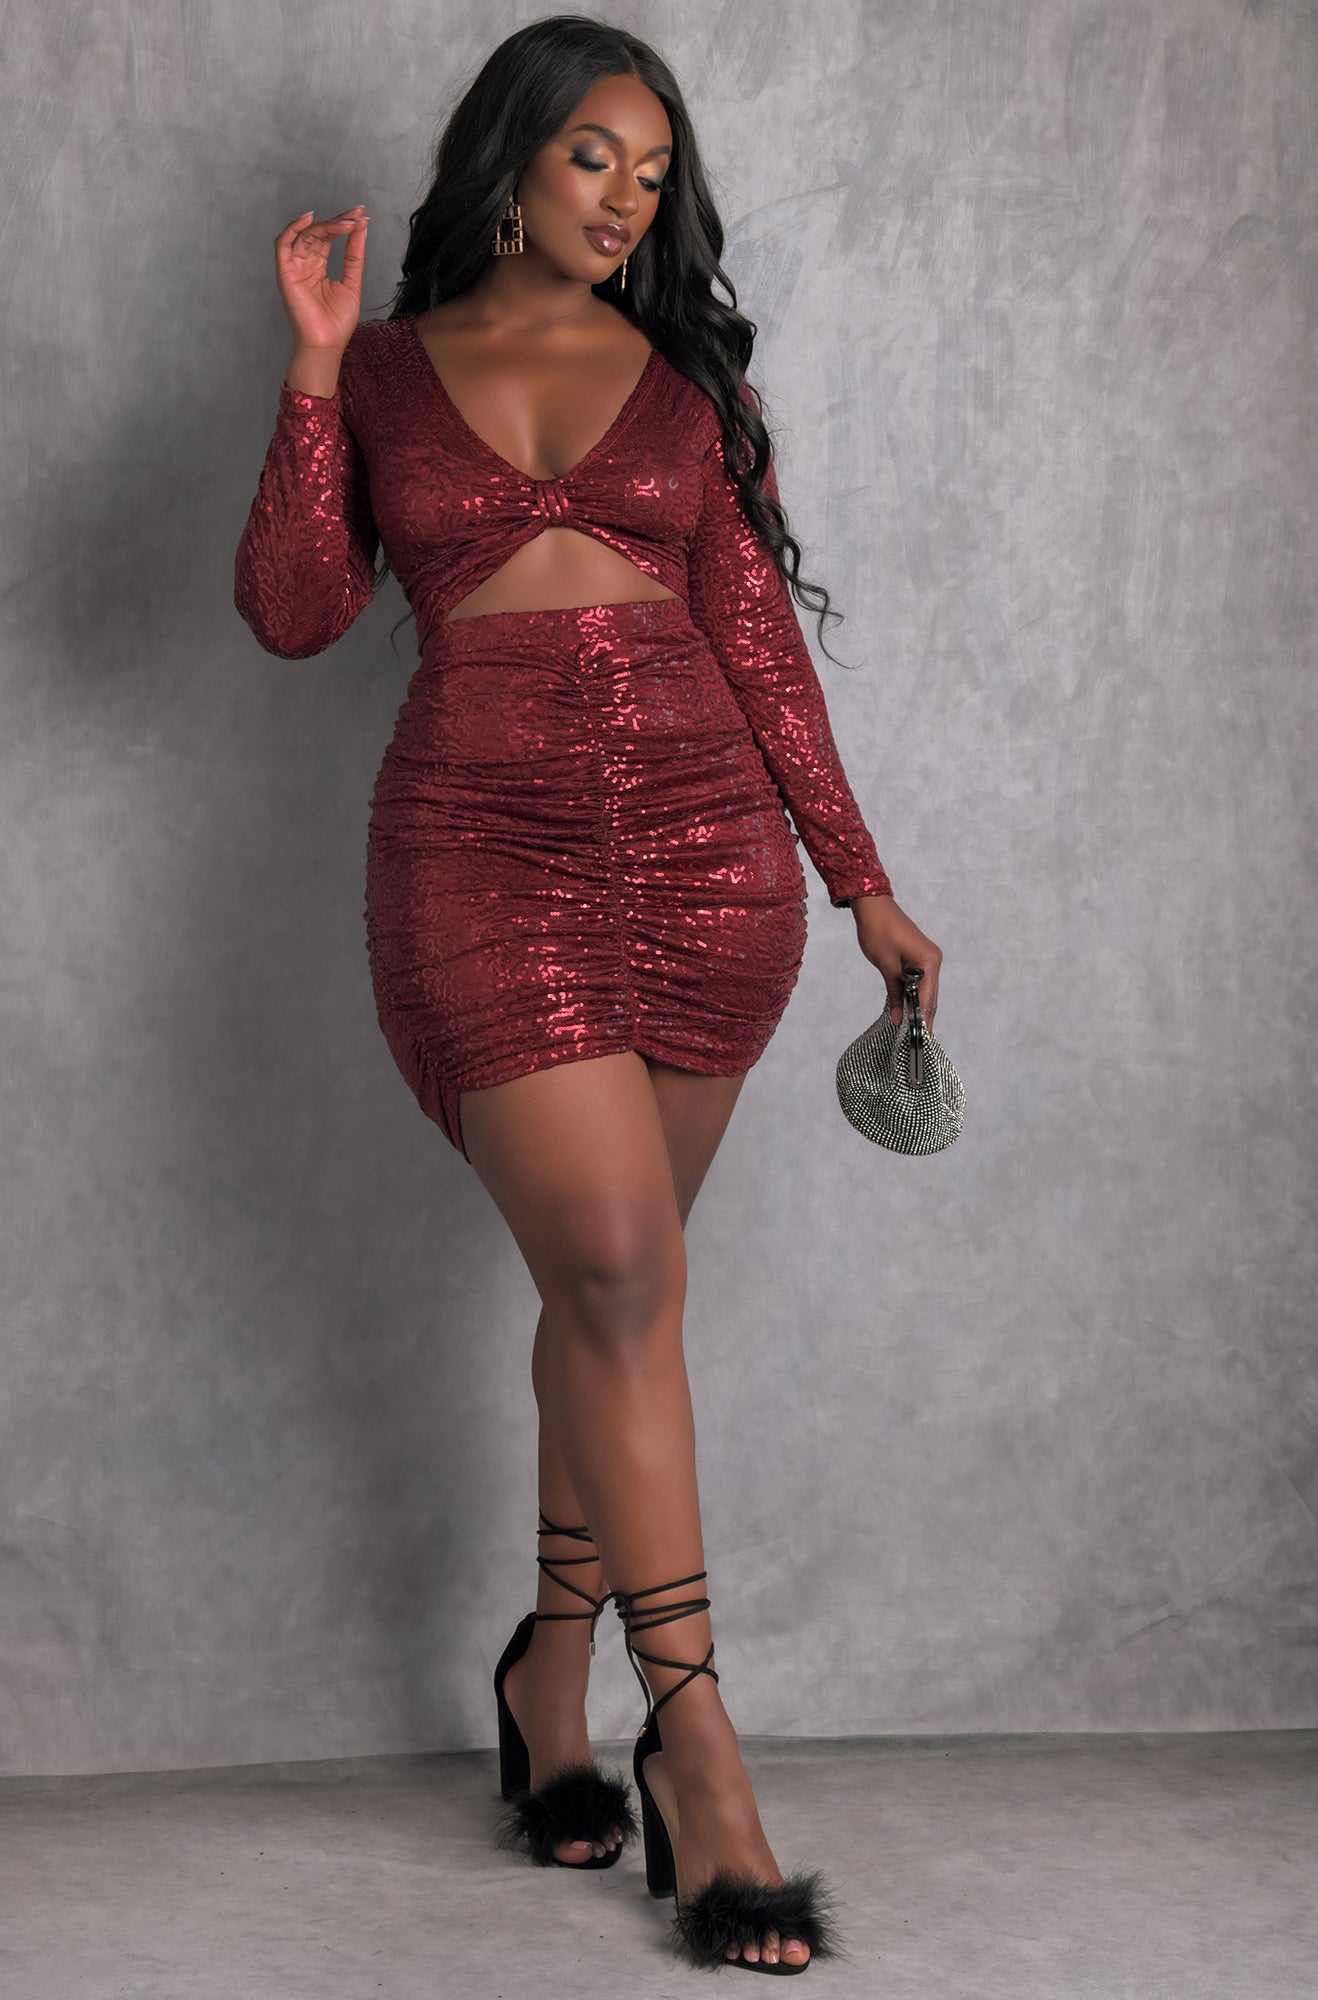 Burgundy Plus Sizes Rebdolls "Rave It Up" Sequin Over The Shoulder Long Sleeve Crop Top 